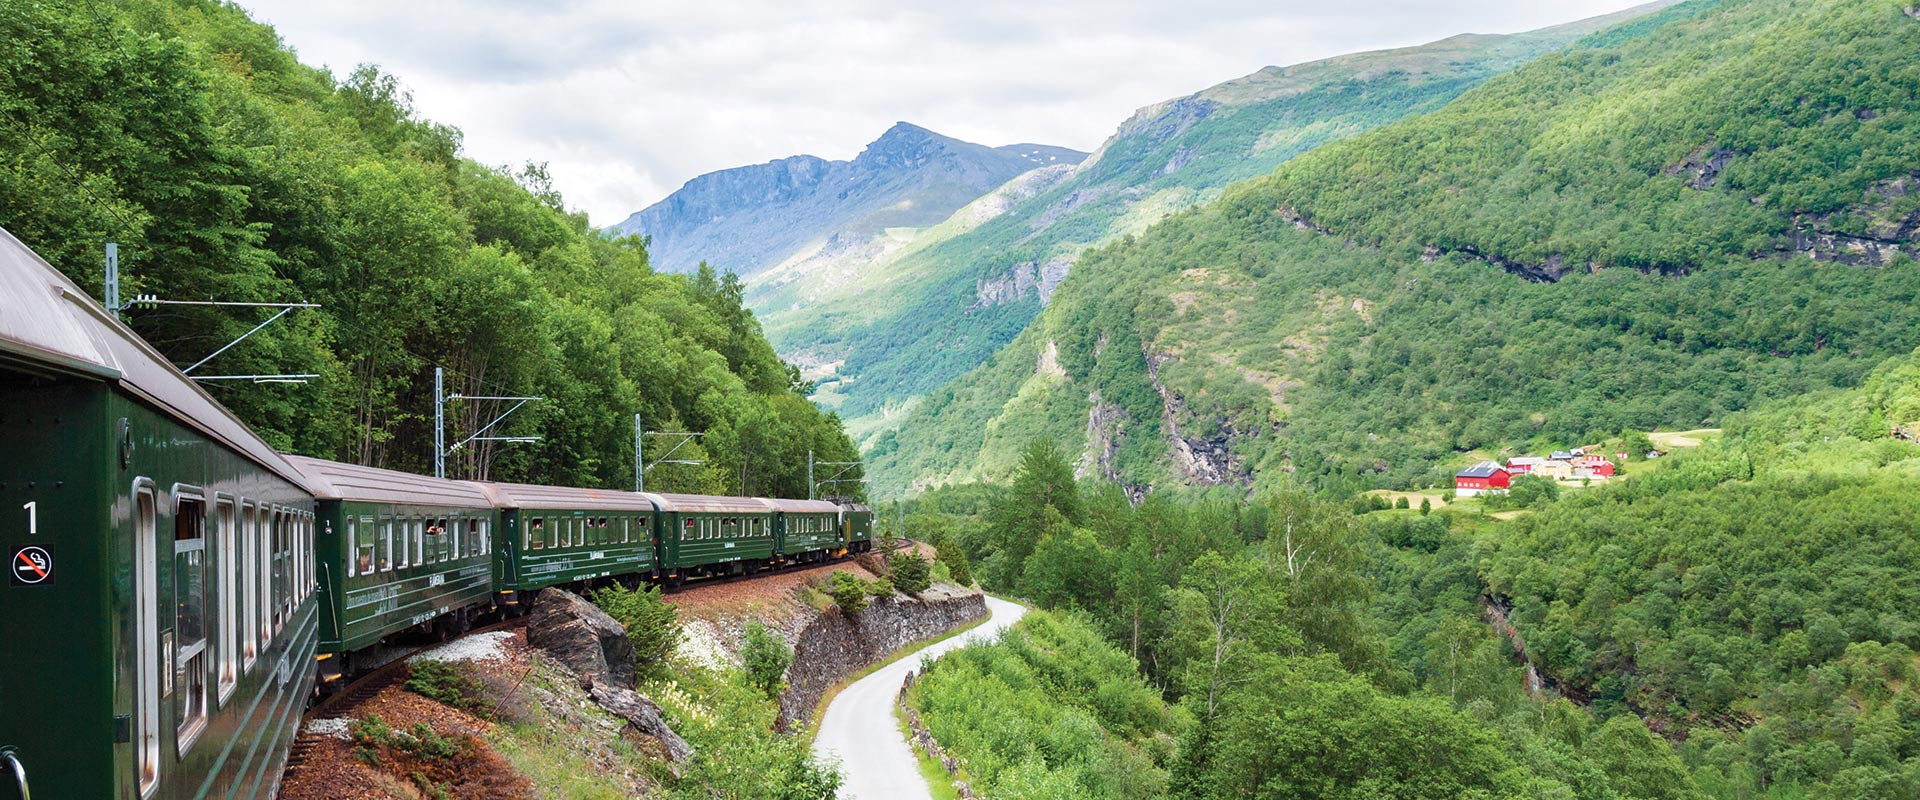 View of train traveling alongside a mountain, Norway